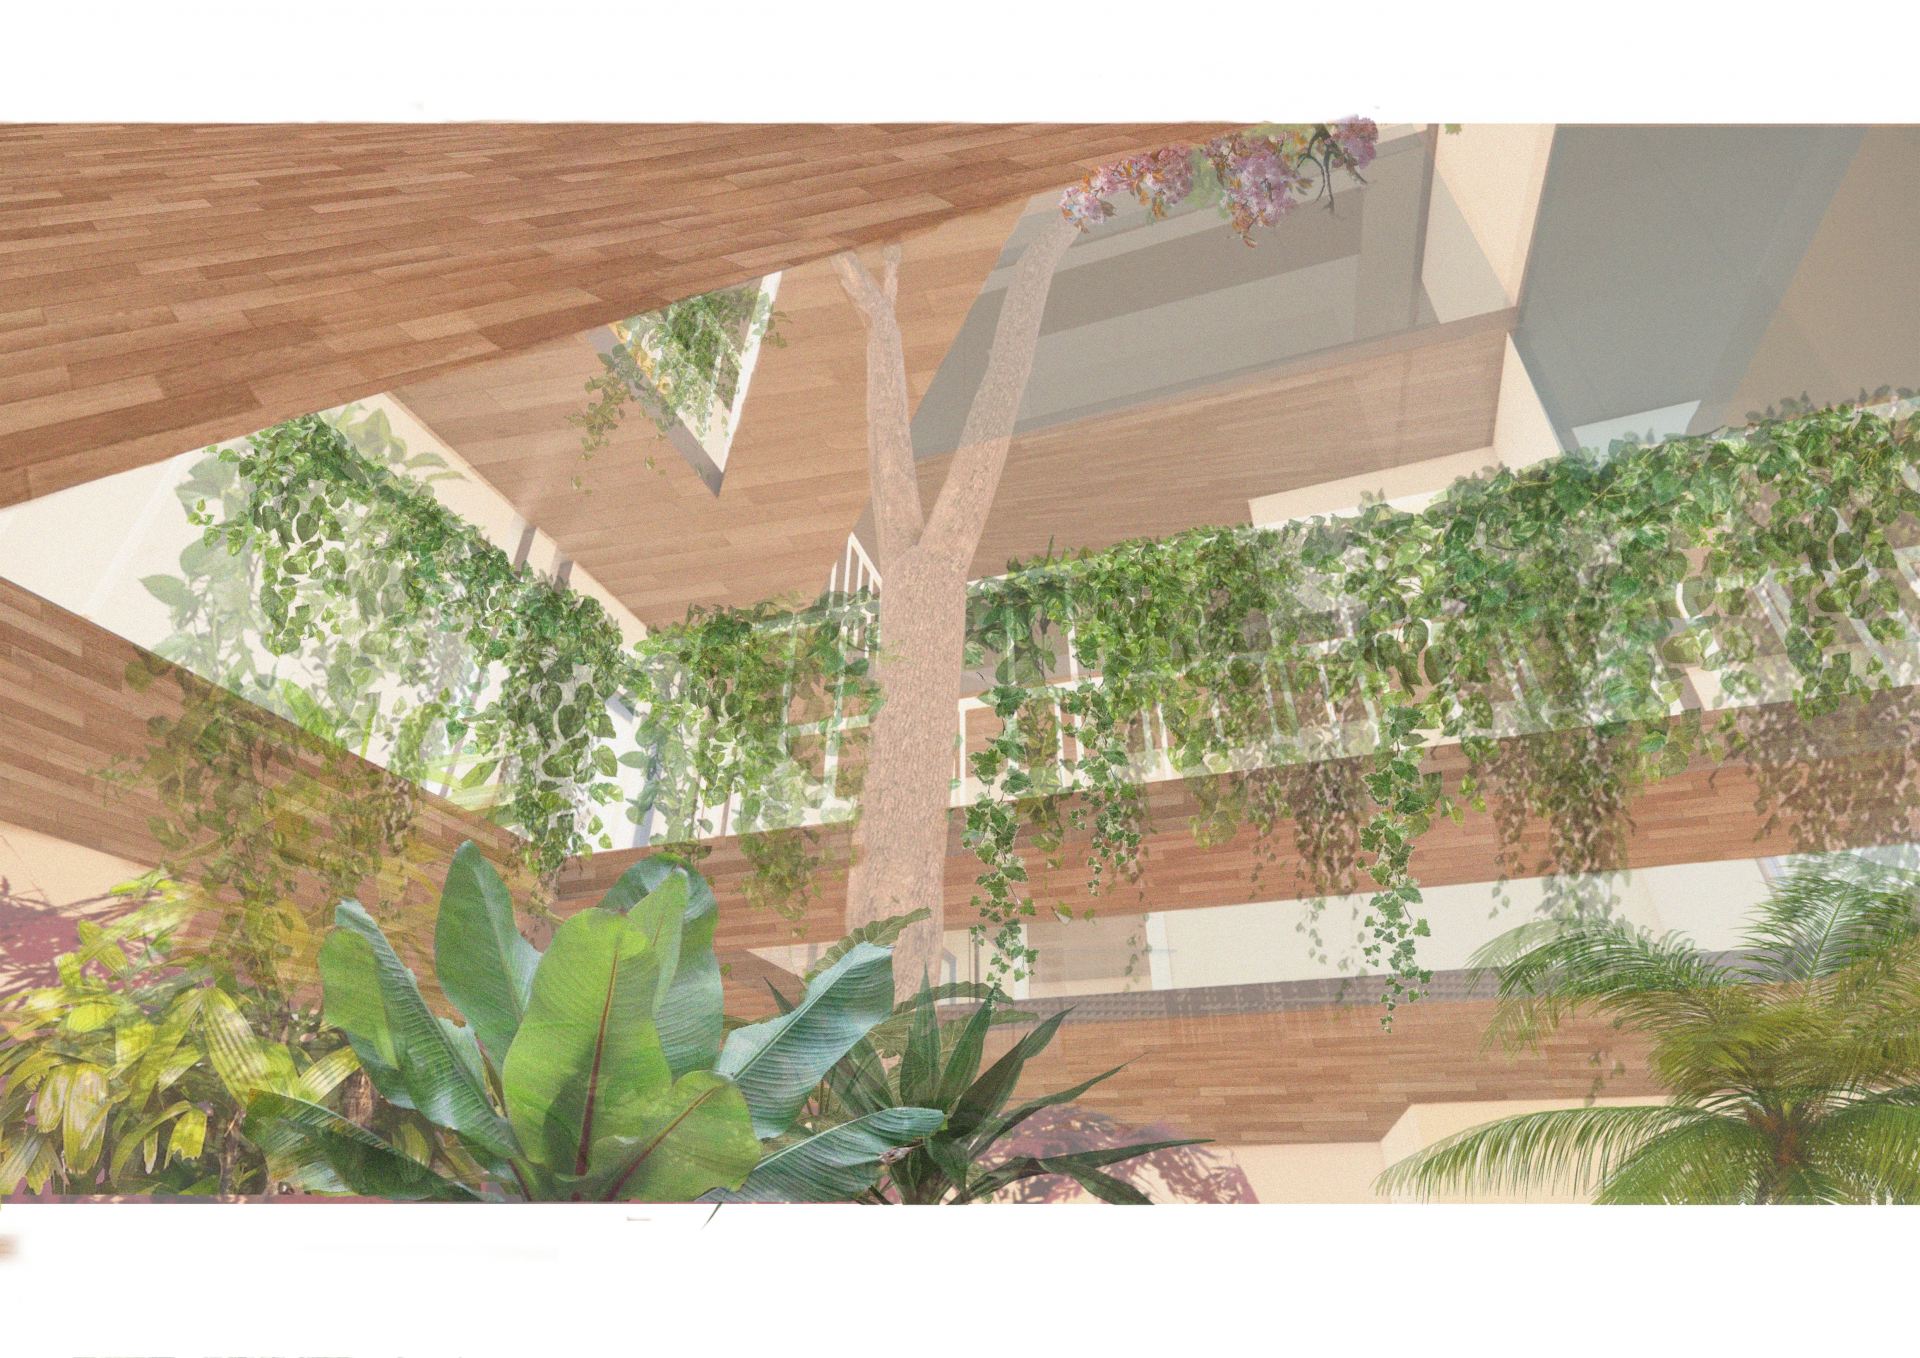 A visual looking up into the atrium with the planting clearly visible